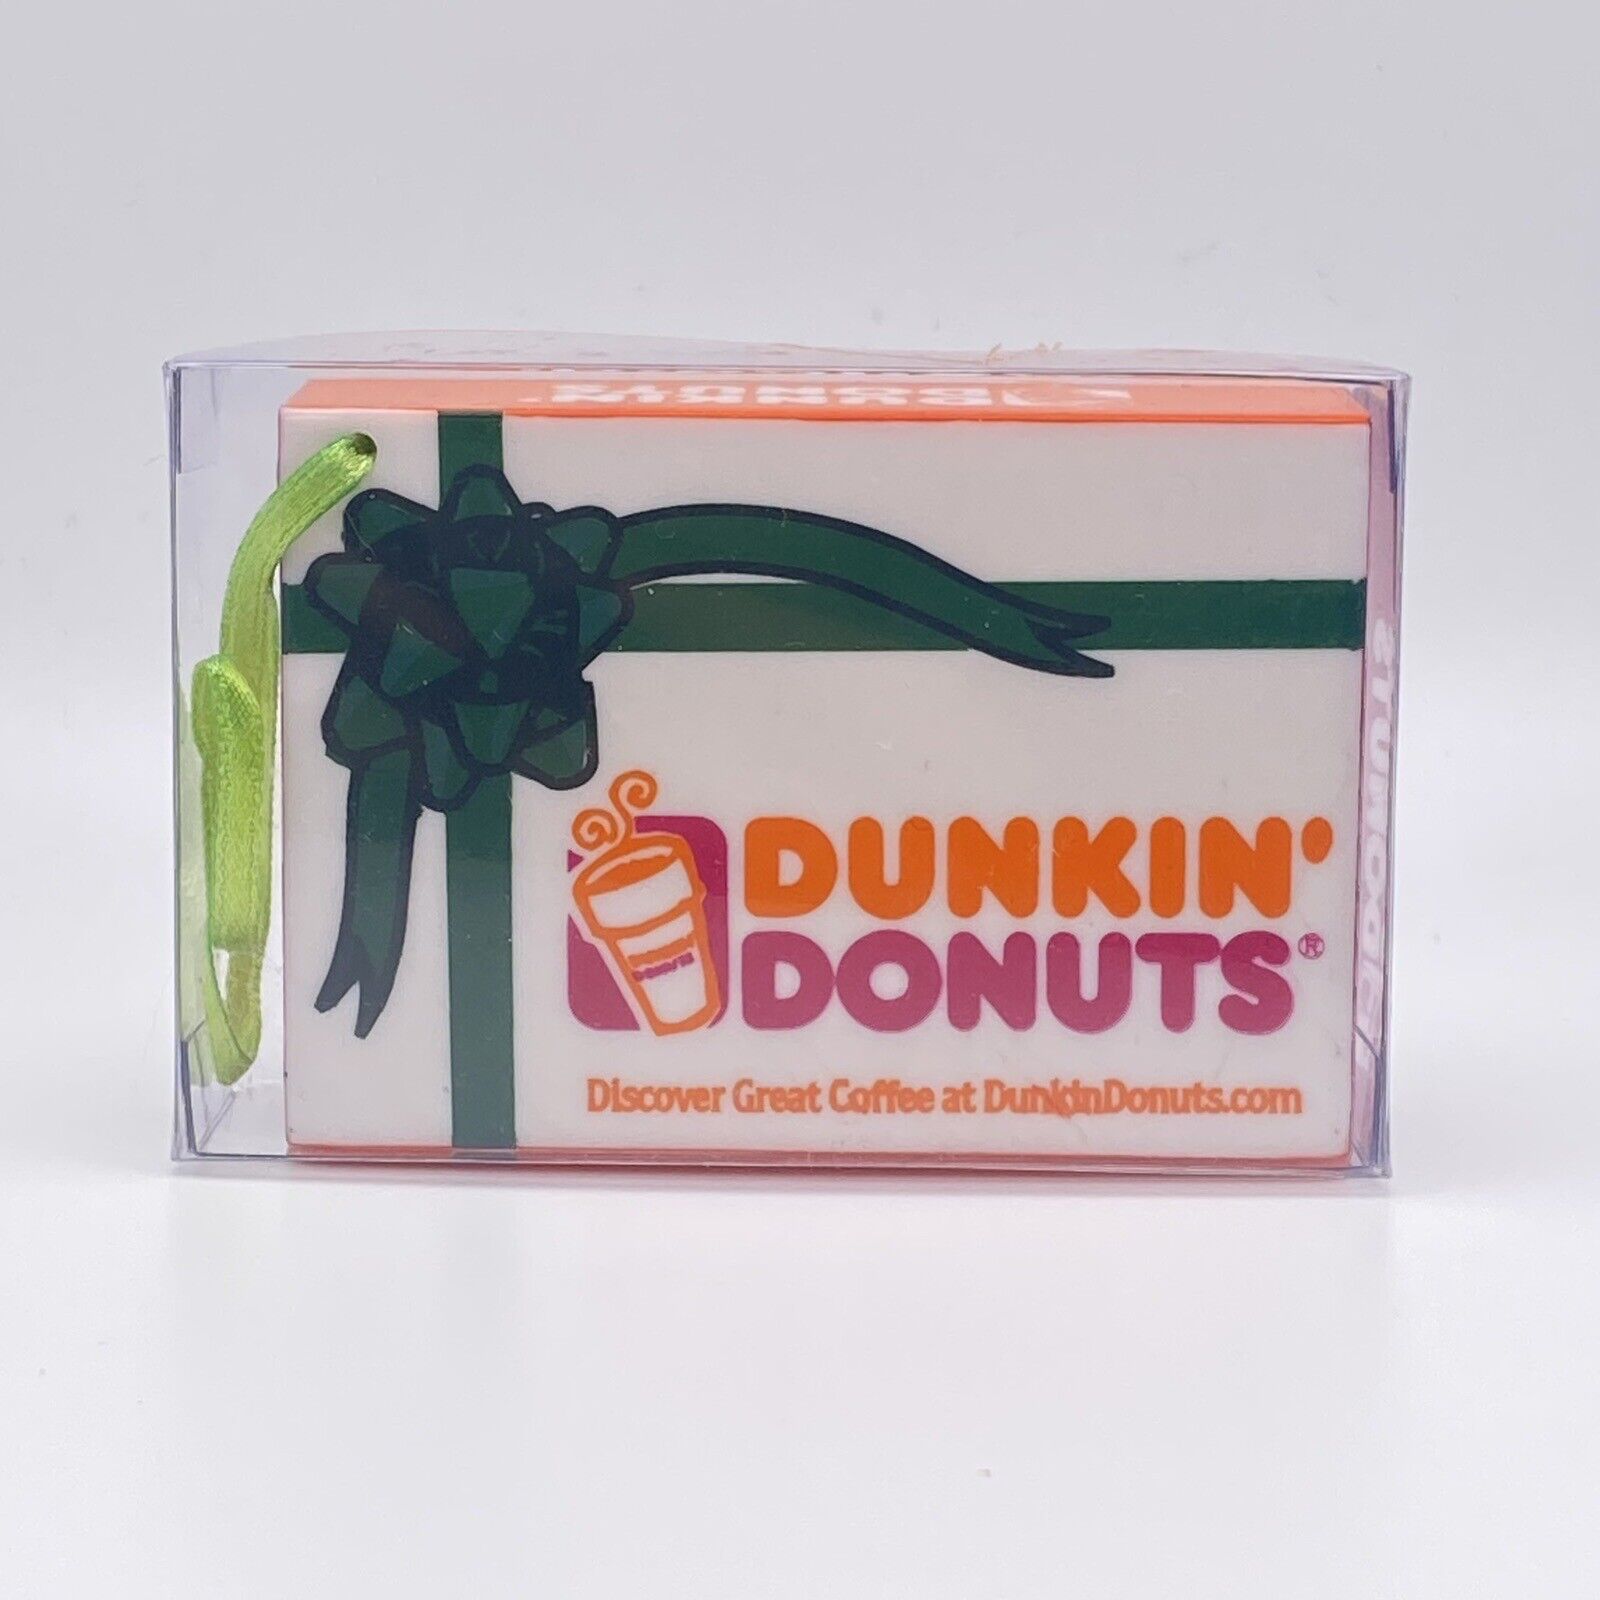 New Vintage Dunkin Donuts Donut Box Christmas 2001 Ornament NOS Collectable